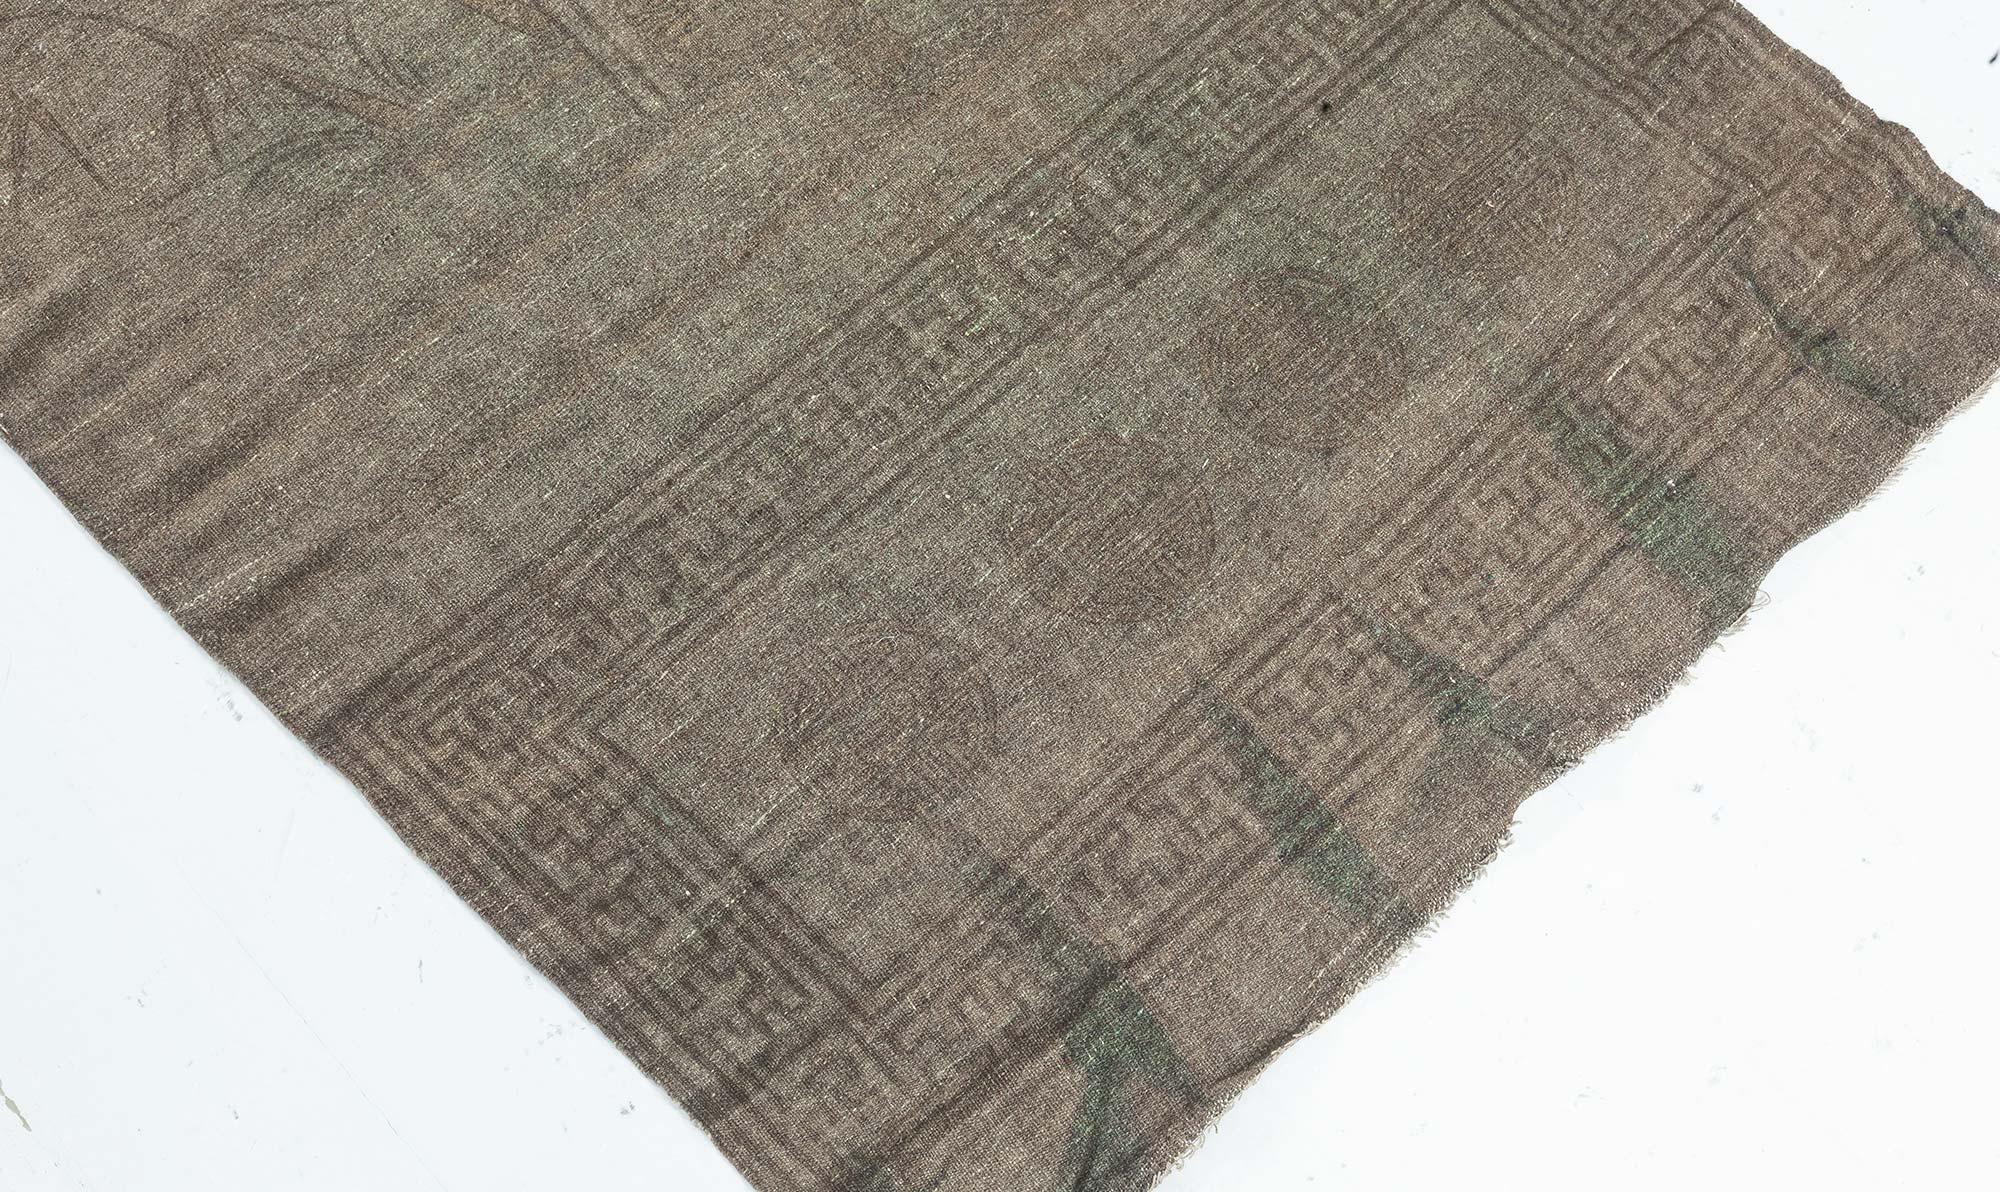 Antique Kilim with Bamboo Design in Green and Brown Runner In Good Condition For Sale In New York, NY